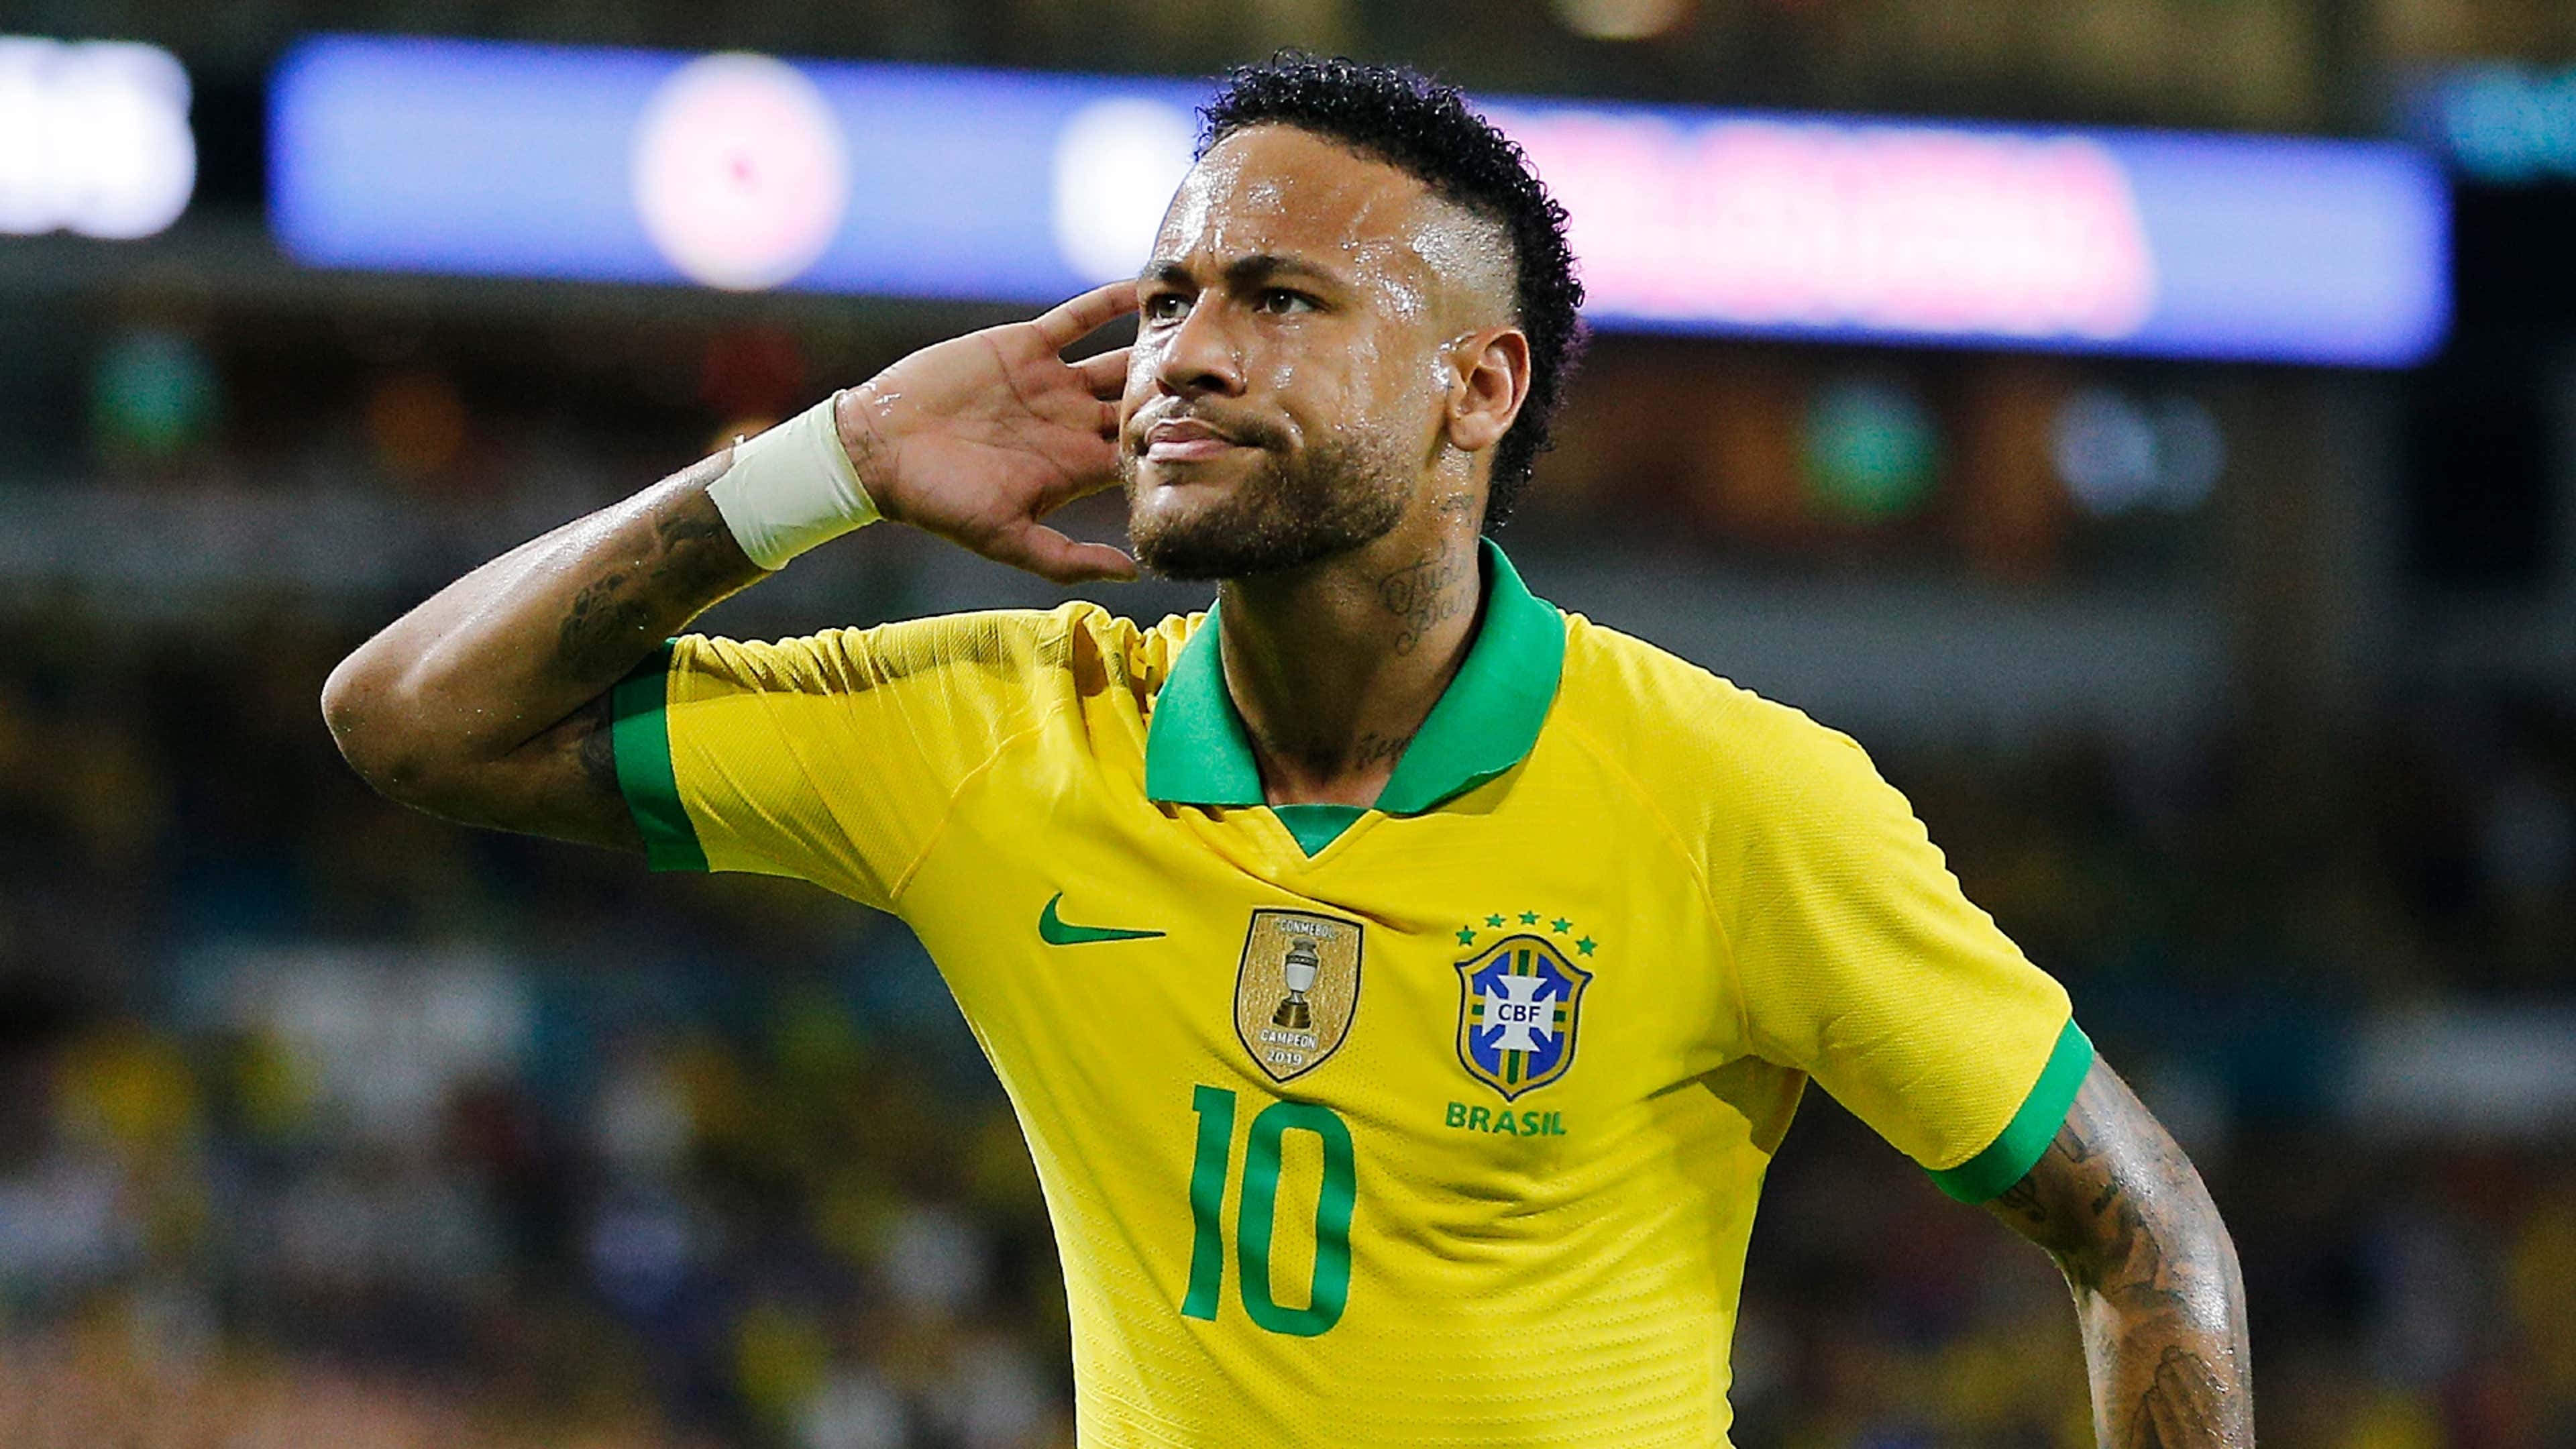 Jesus calls on Brazil to step up in Neymar's absence | Goal.com